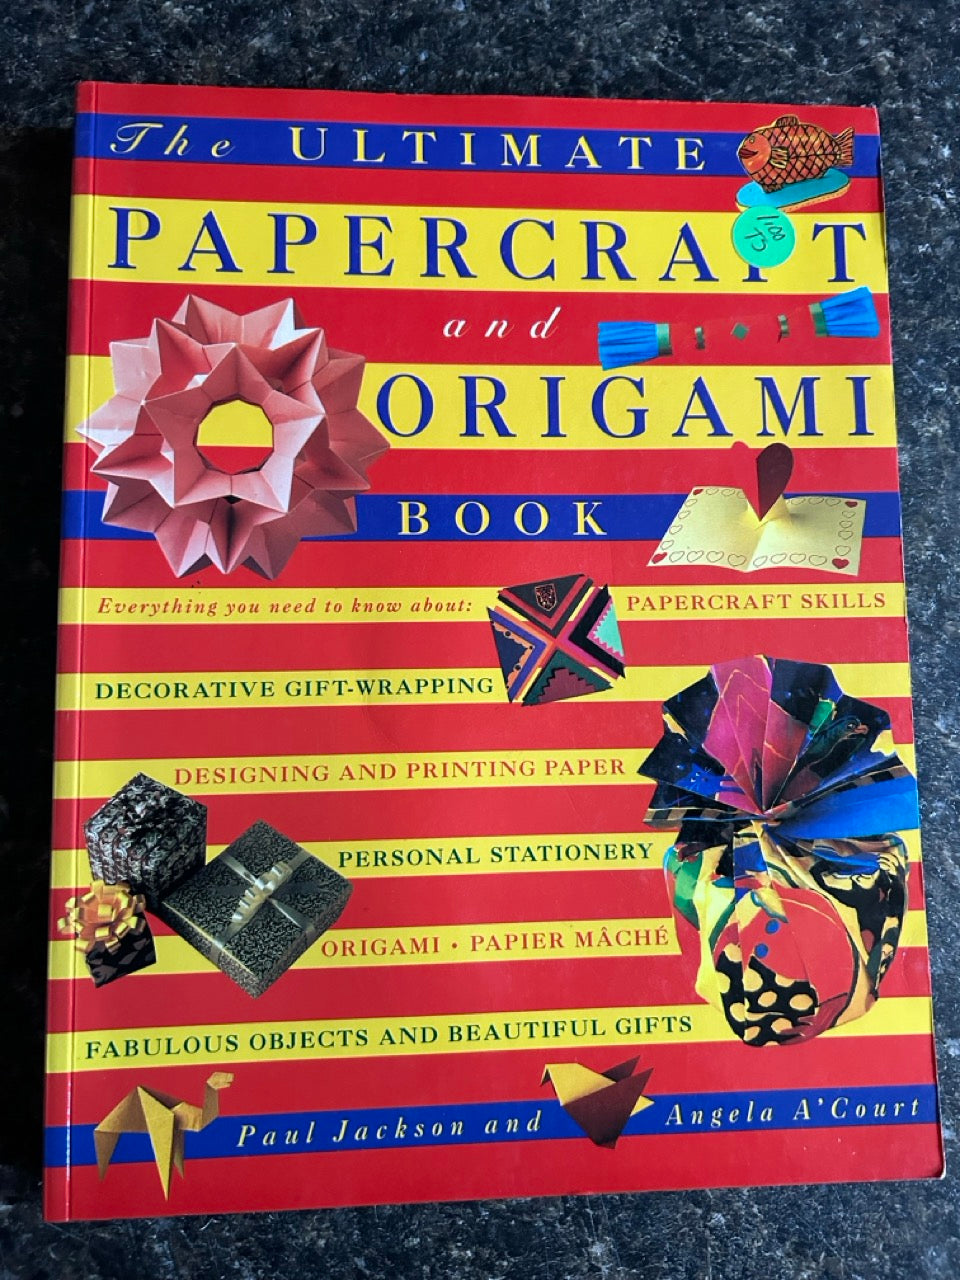 The Ultimate Papercraft and Origami Book - Paul Jackson and Angela A'Court